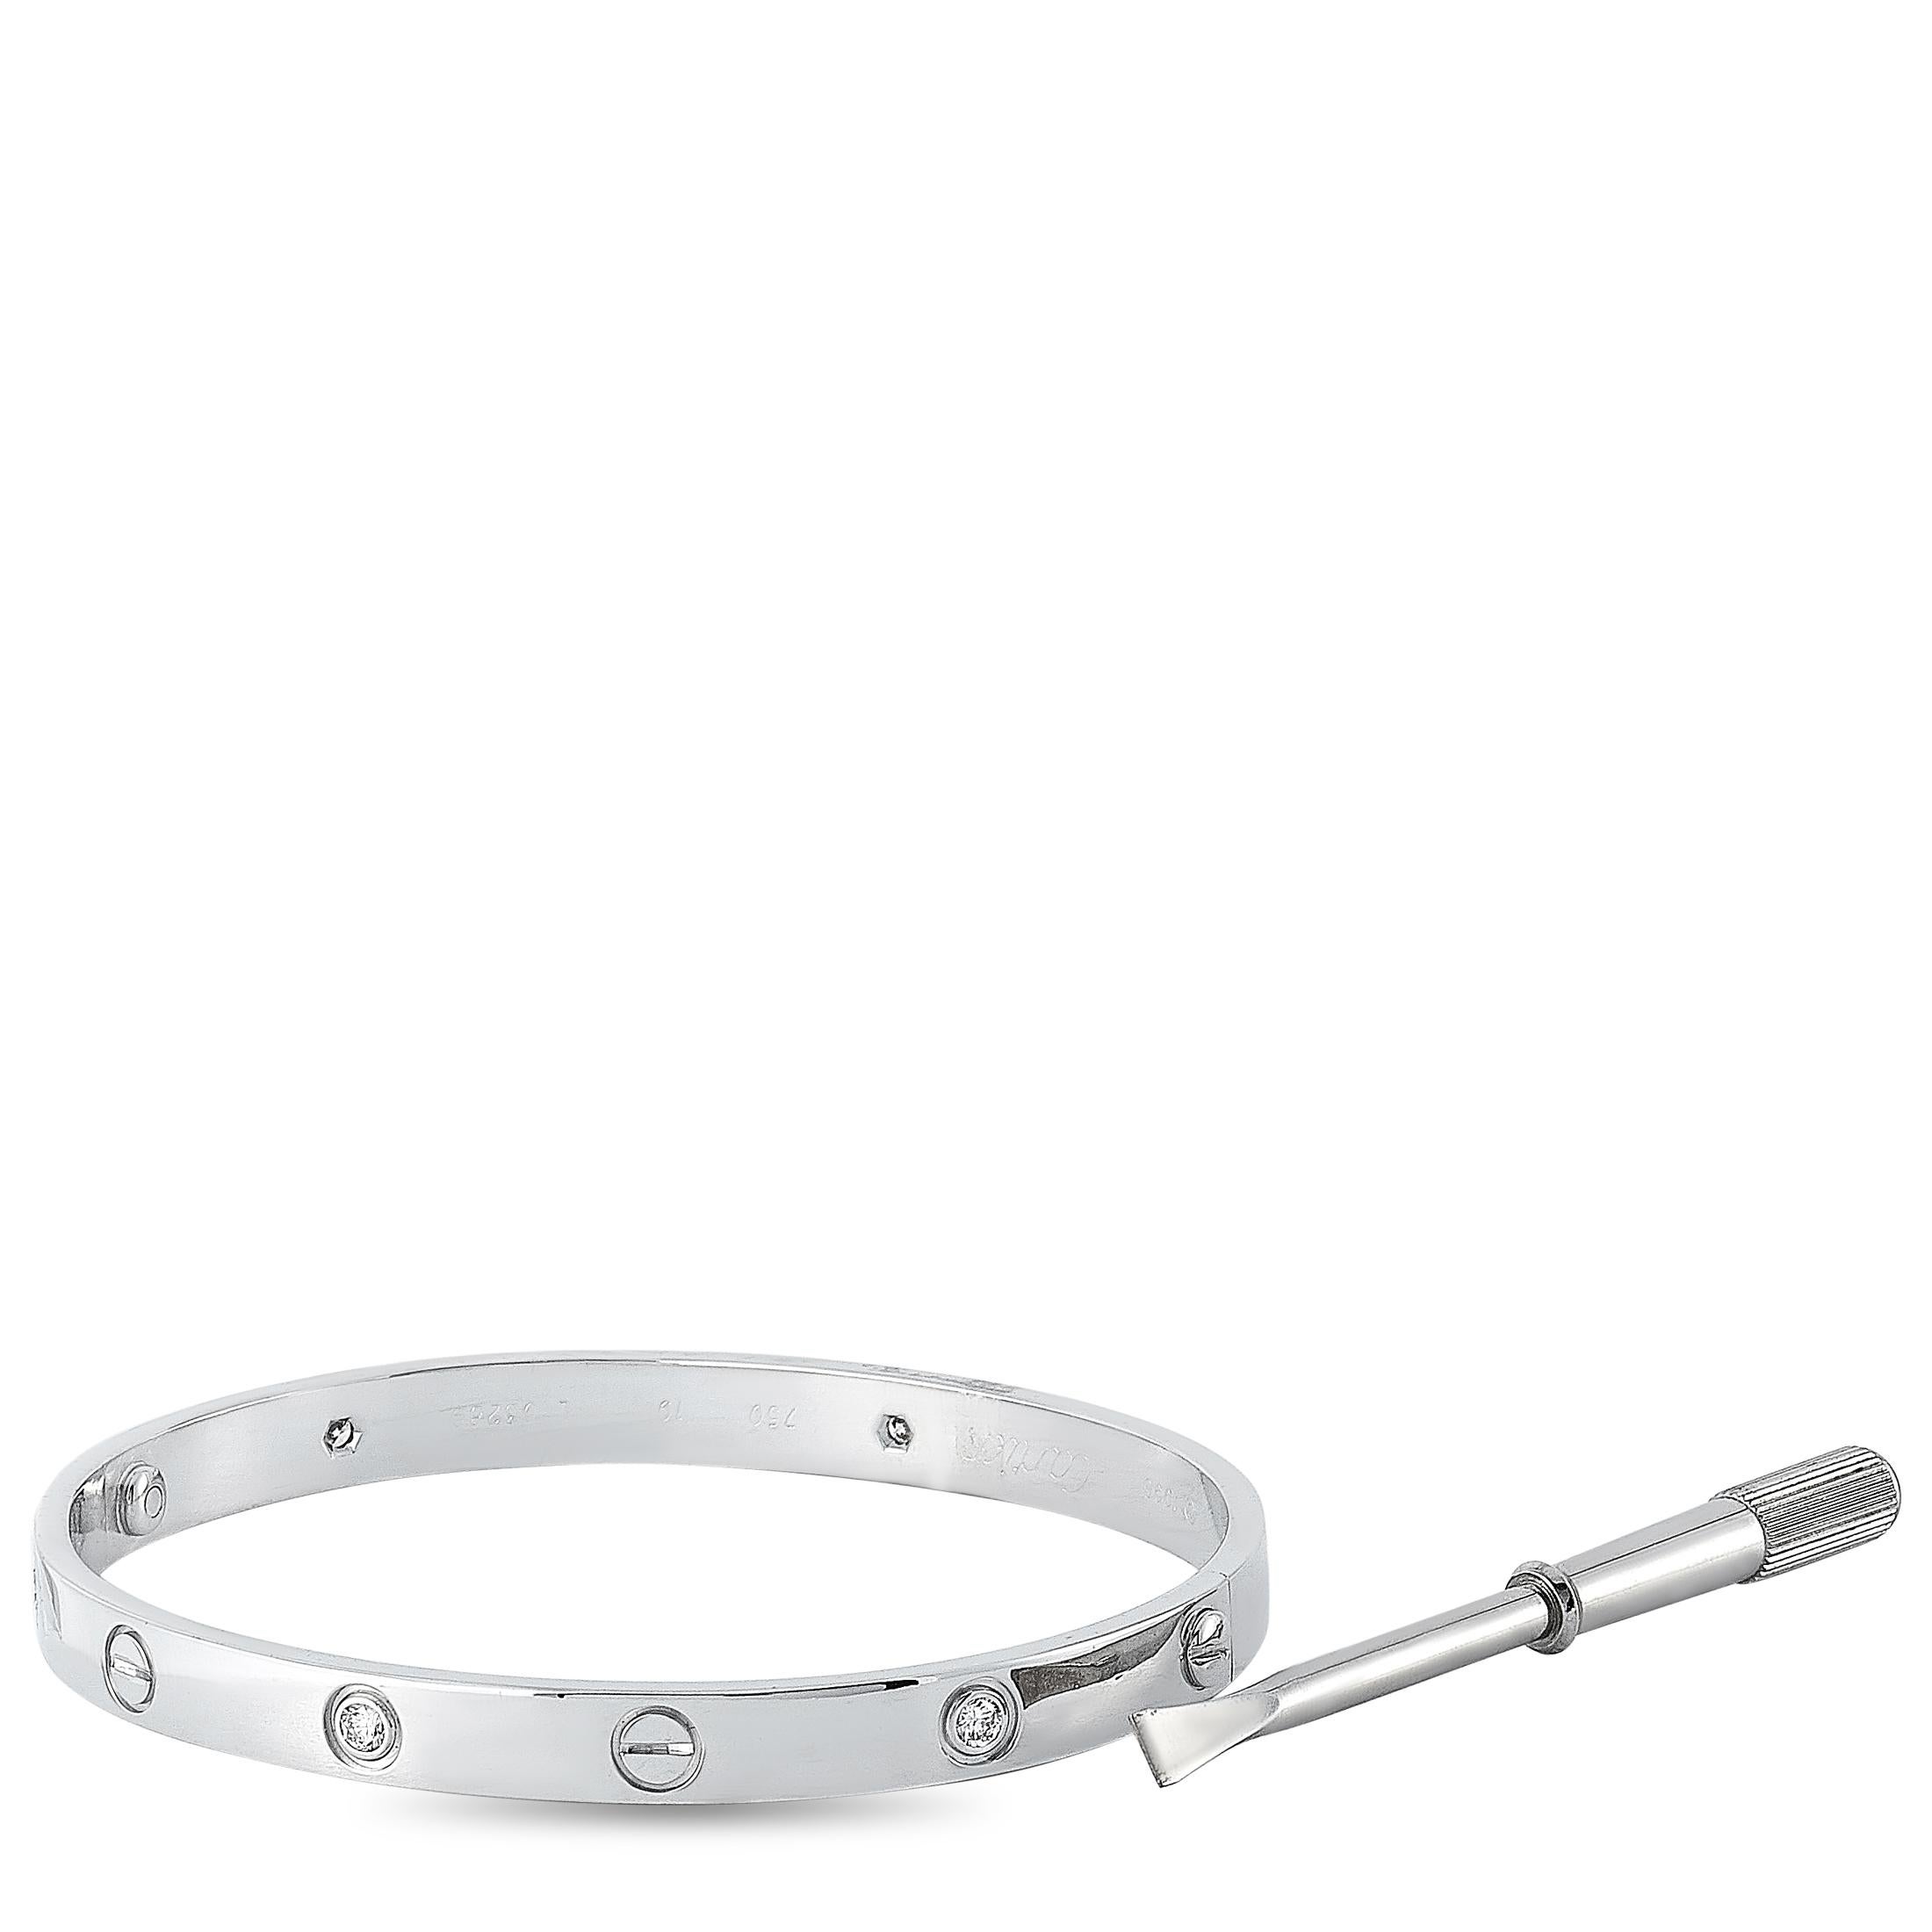 The Cartier “LOVE” bracelet is crafted from 18K white gold and set with six diamond stones that amount to 0.60 carats. The bracelet weighs 35.5 grams, measures 7.85” in length, and is delivered with a screwdriver.

This jewelry piece is offered in